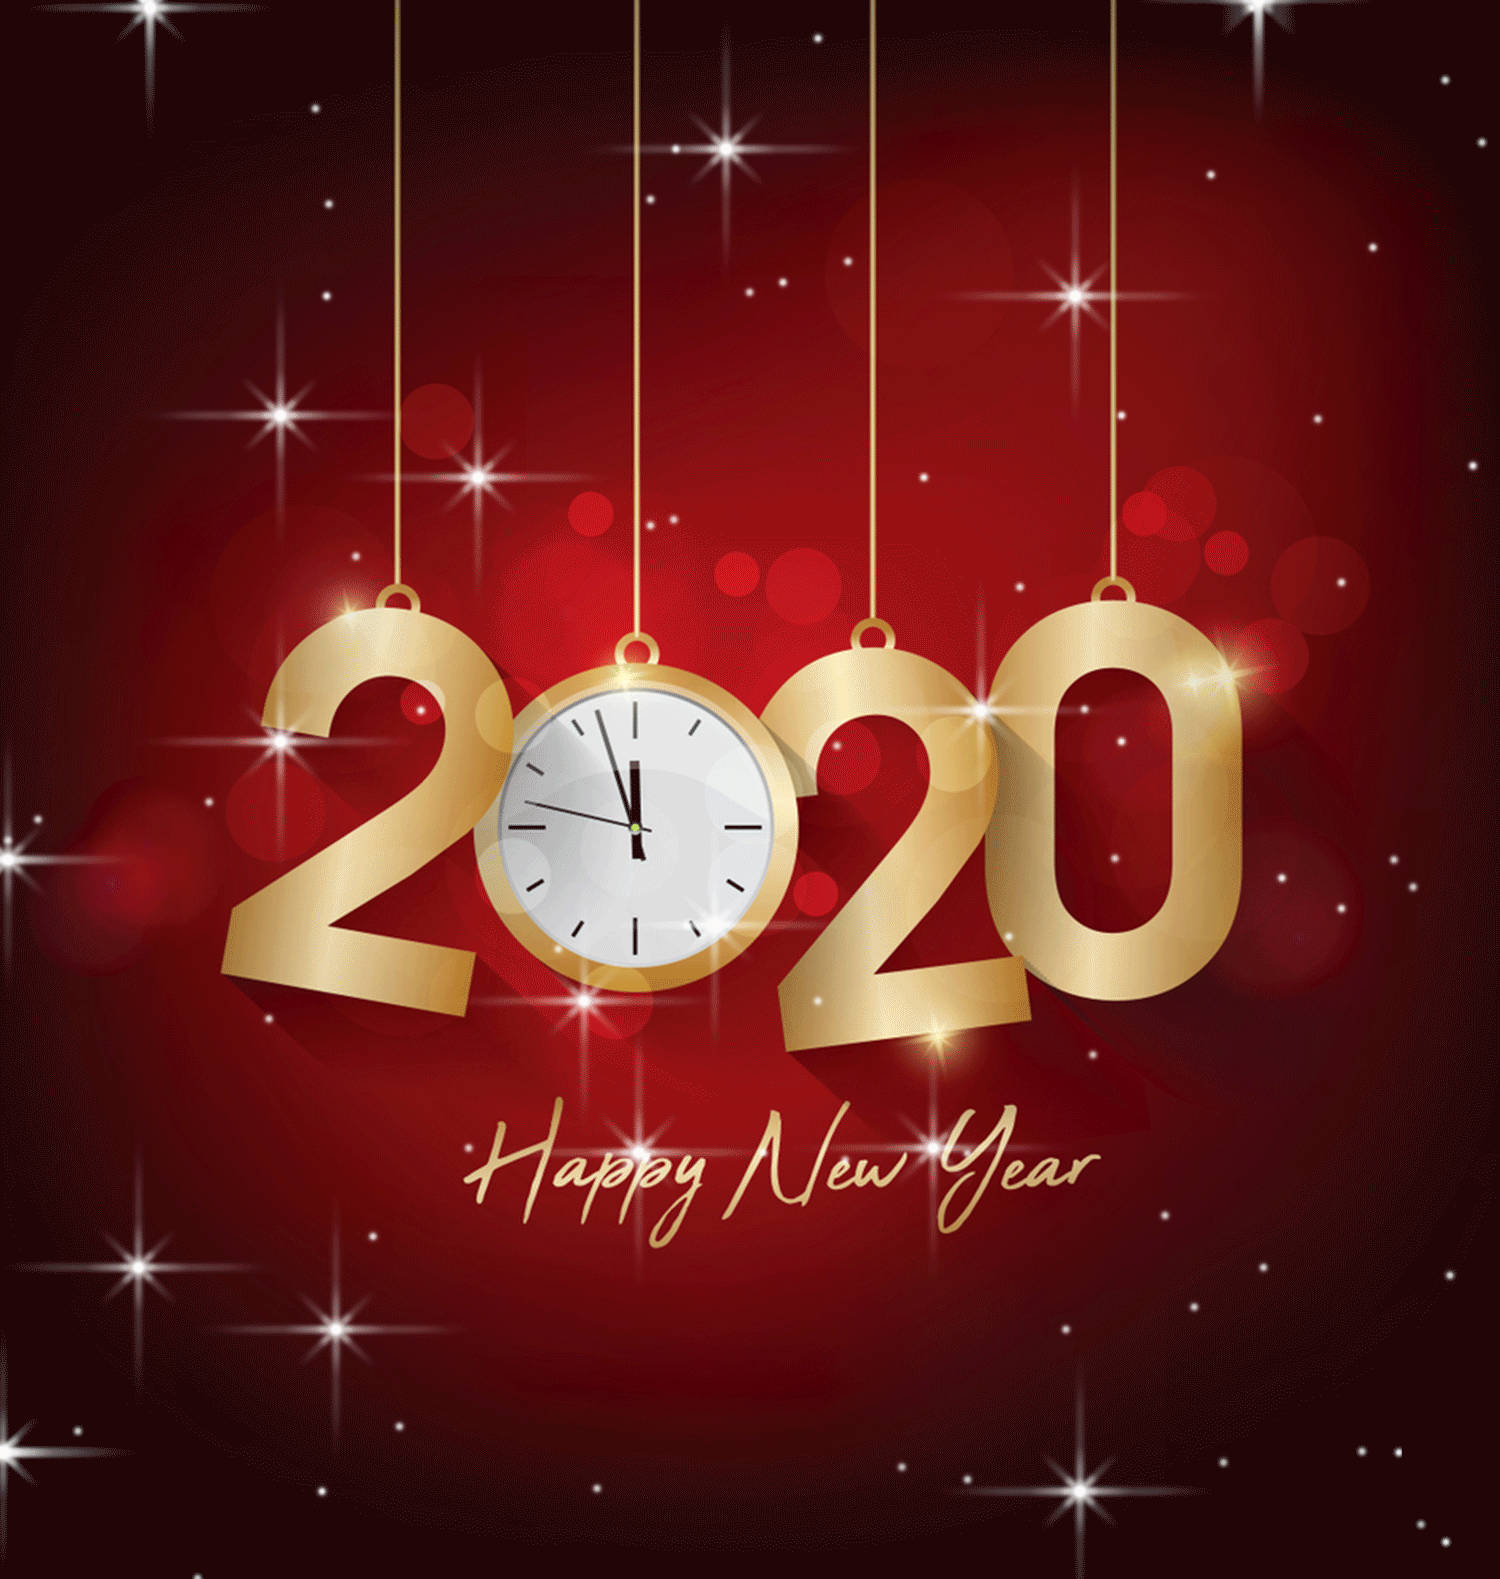 Happy New Year 2020 Image Hd Free – New Year 2020 Wallpaper